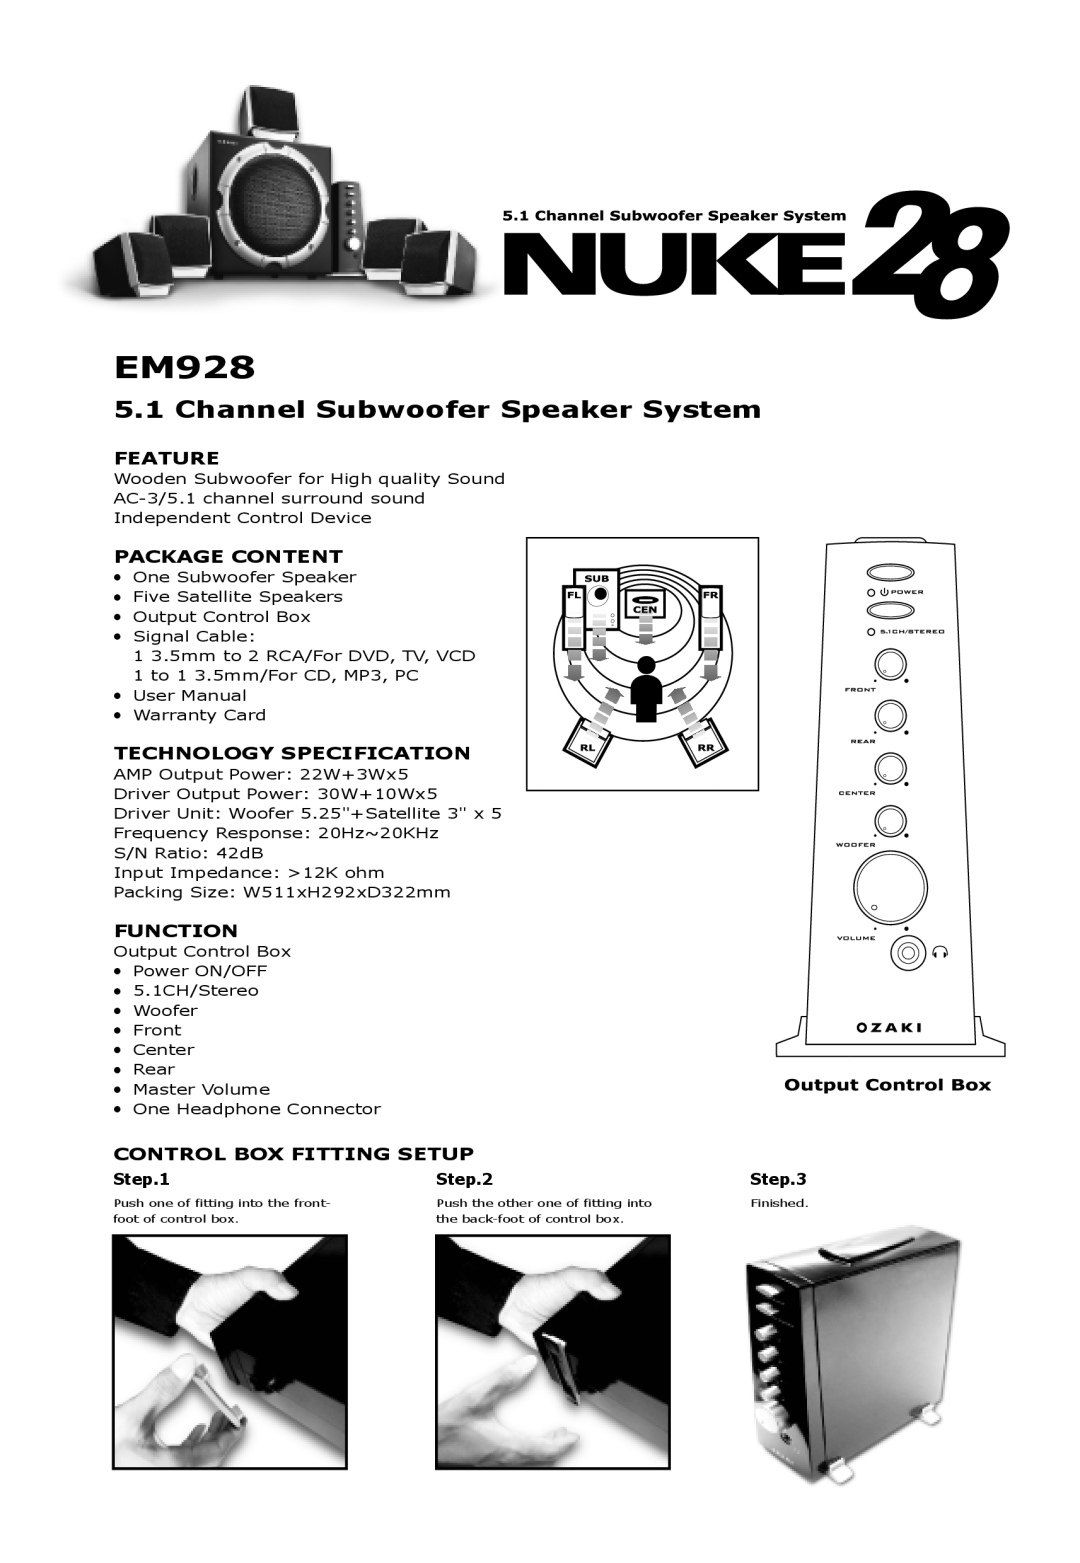 Ozaki Worldwide EM928 manual Channel Subwoofer Speaker System, Feature, Package Content, Technology Specification, Function 